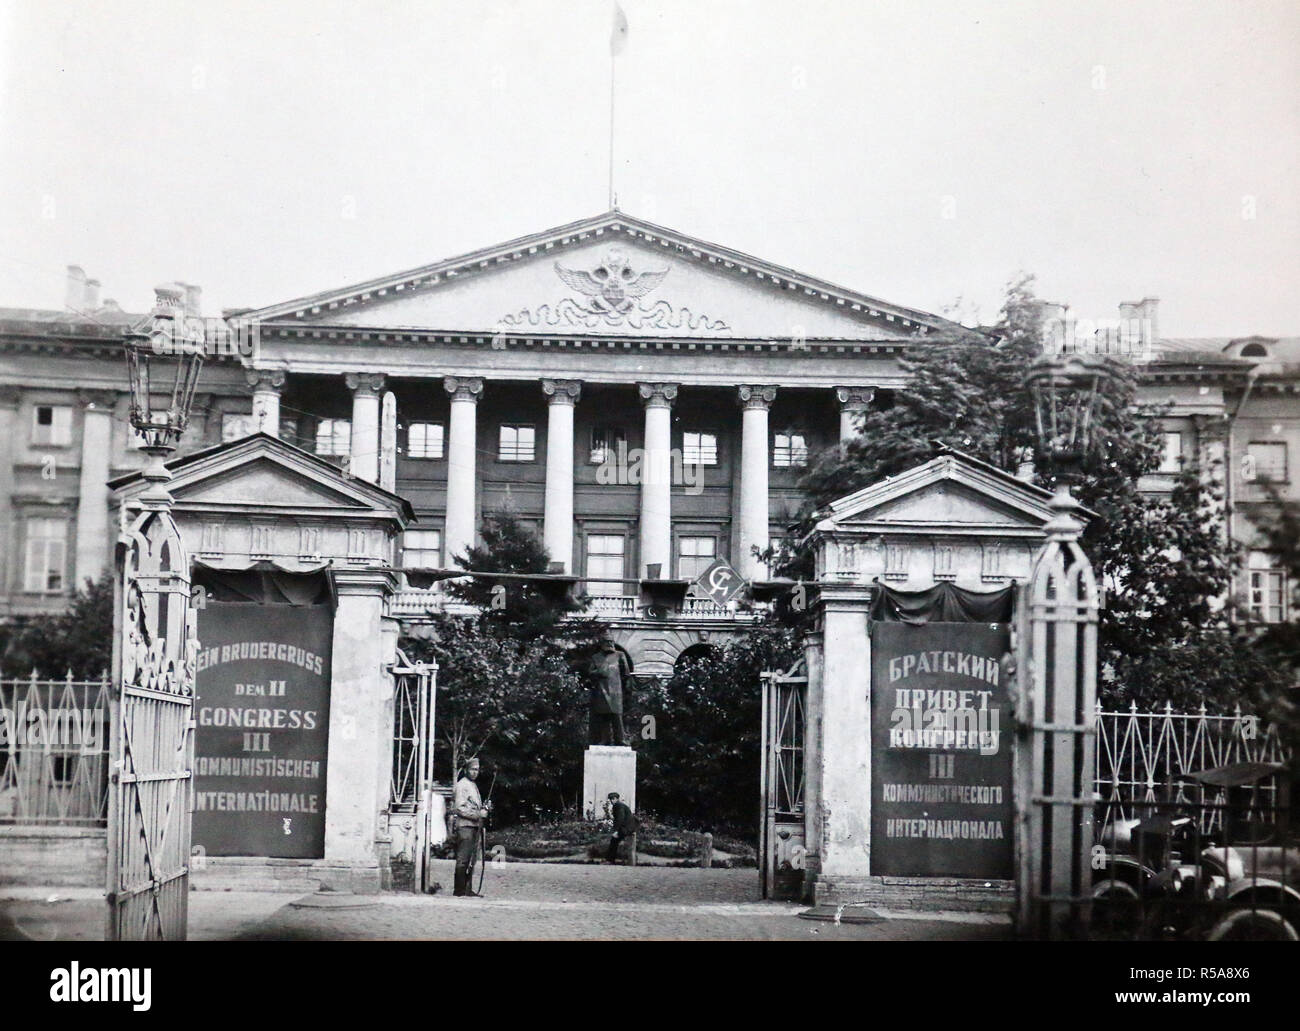 'Former court of the page-boys'. During the imperial period, Smolny Institute was an educational establishment for noble girls, where they used to learn good manners at the tsarist court. After 1917, the building was used as the headquarters for the Bolshevik Party, before the Party moved to Moscow the following year.   The two banners at the entrance read: 'Fraternal greetings to the IInd Congress of the IIIrd Communist International'. Stock Photo